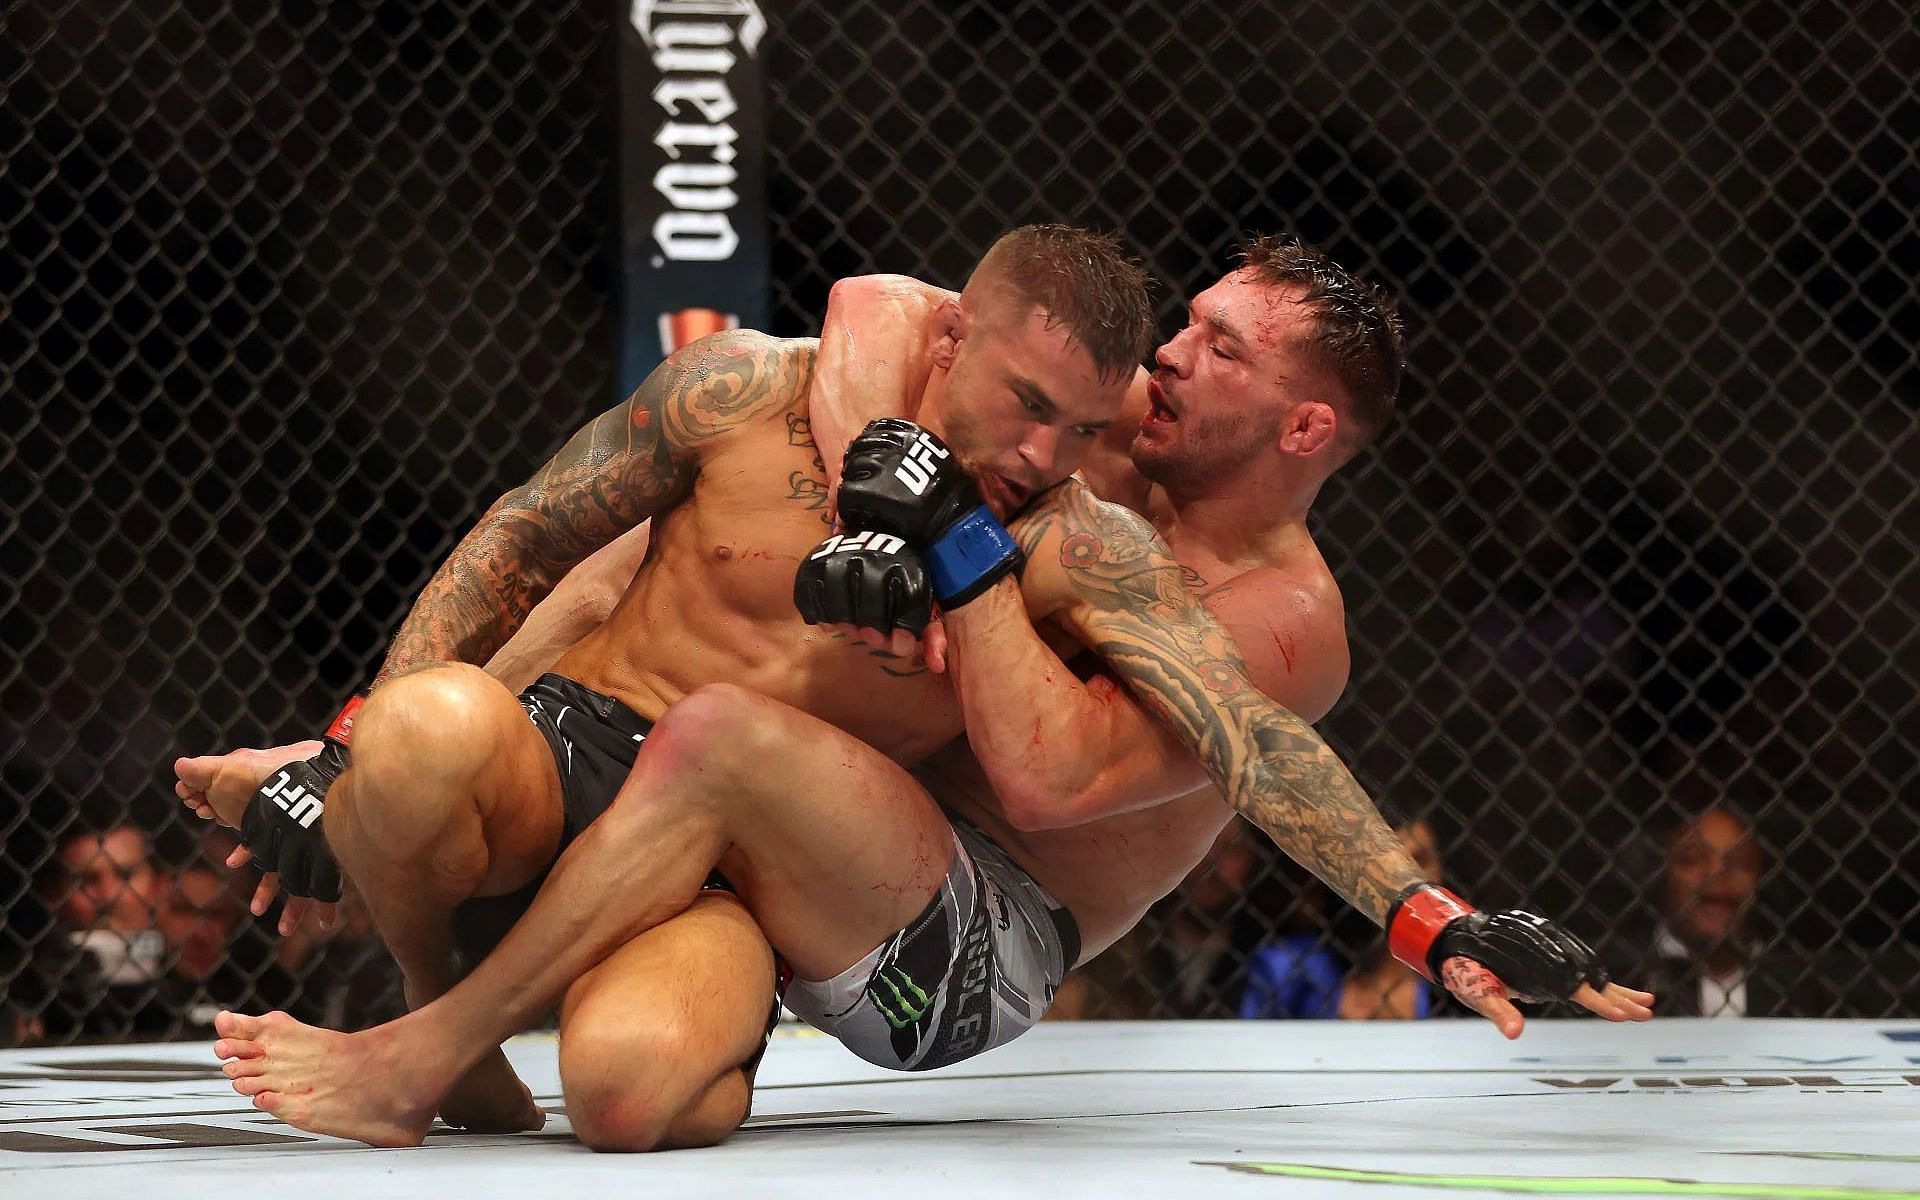 Michael Chandler admitted to fishhooking Dustin Poirier in their recent bout